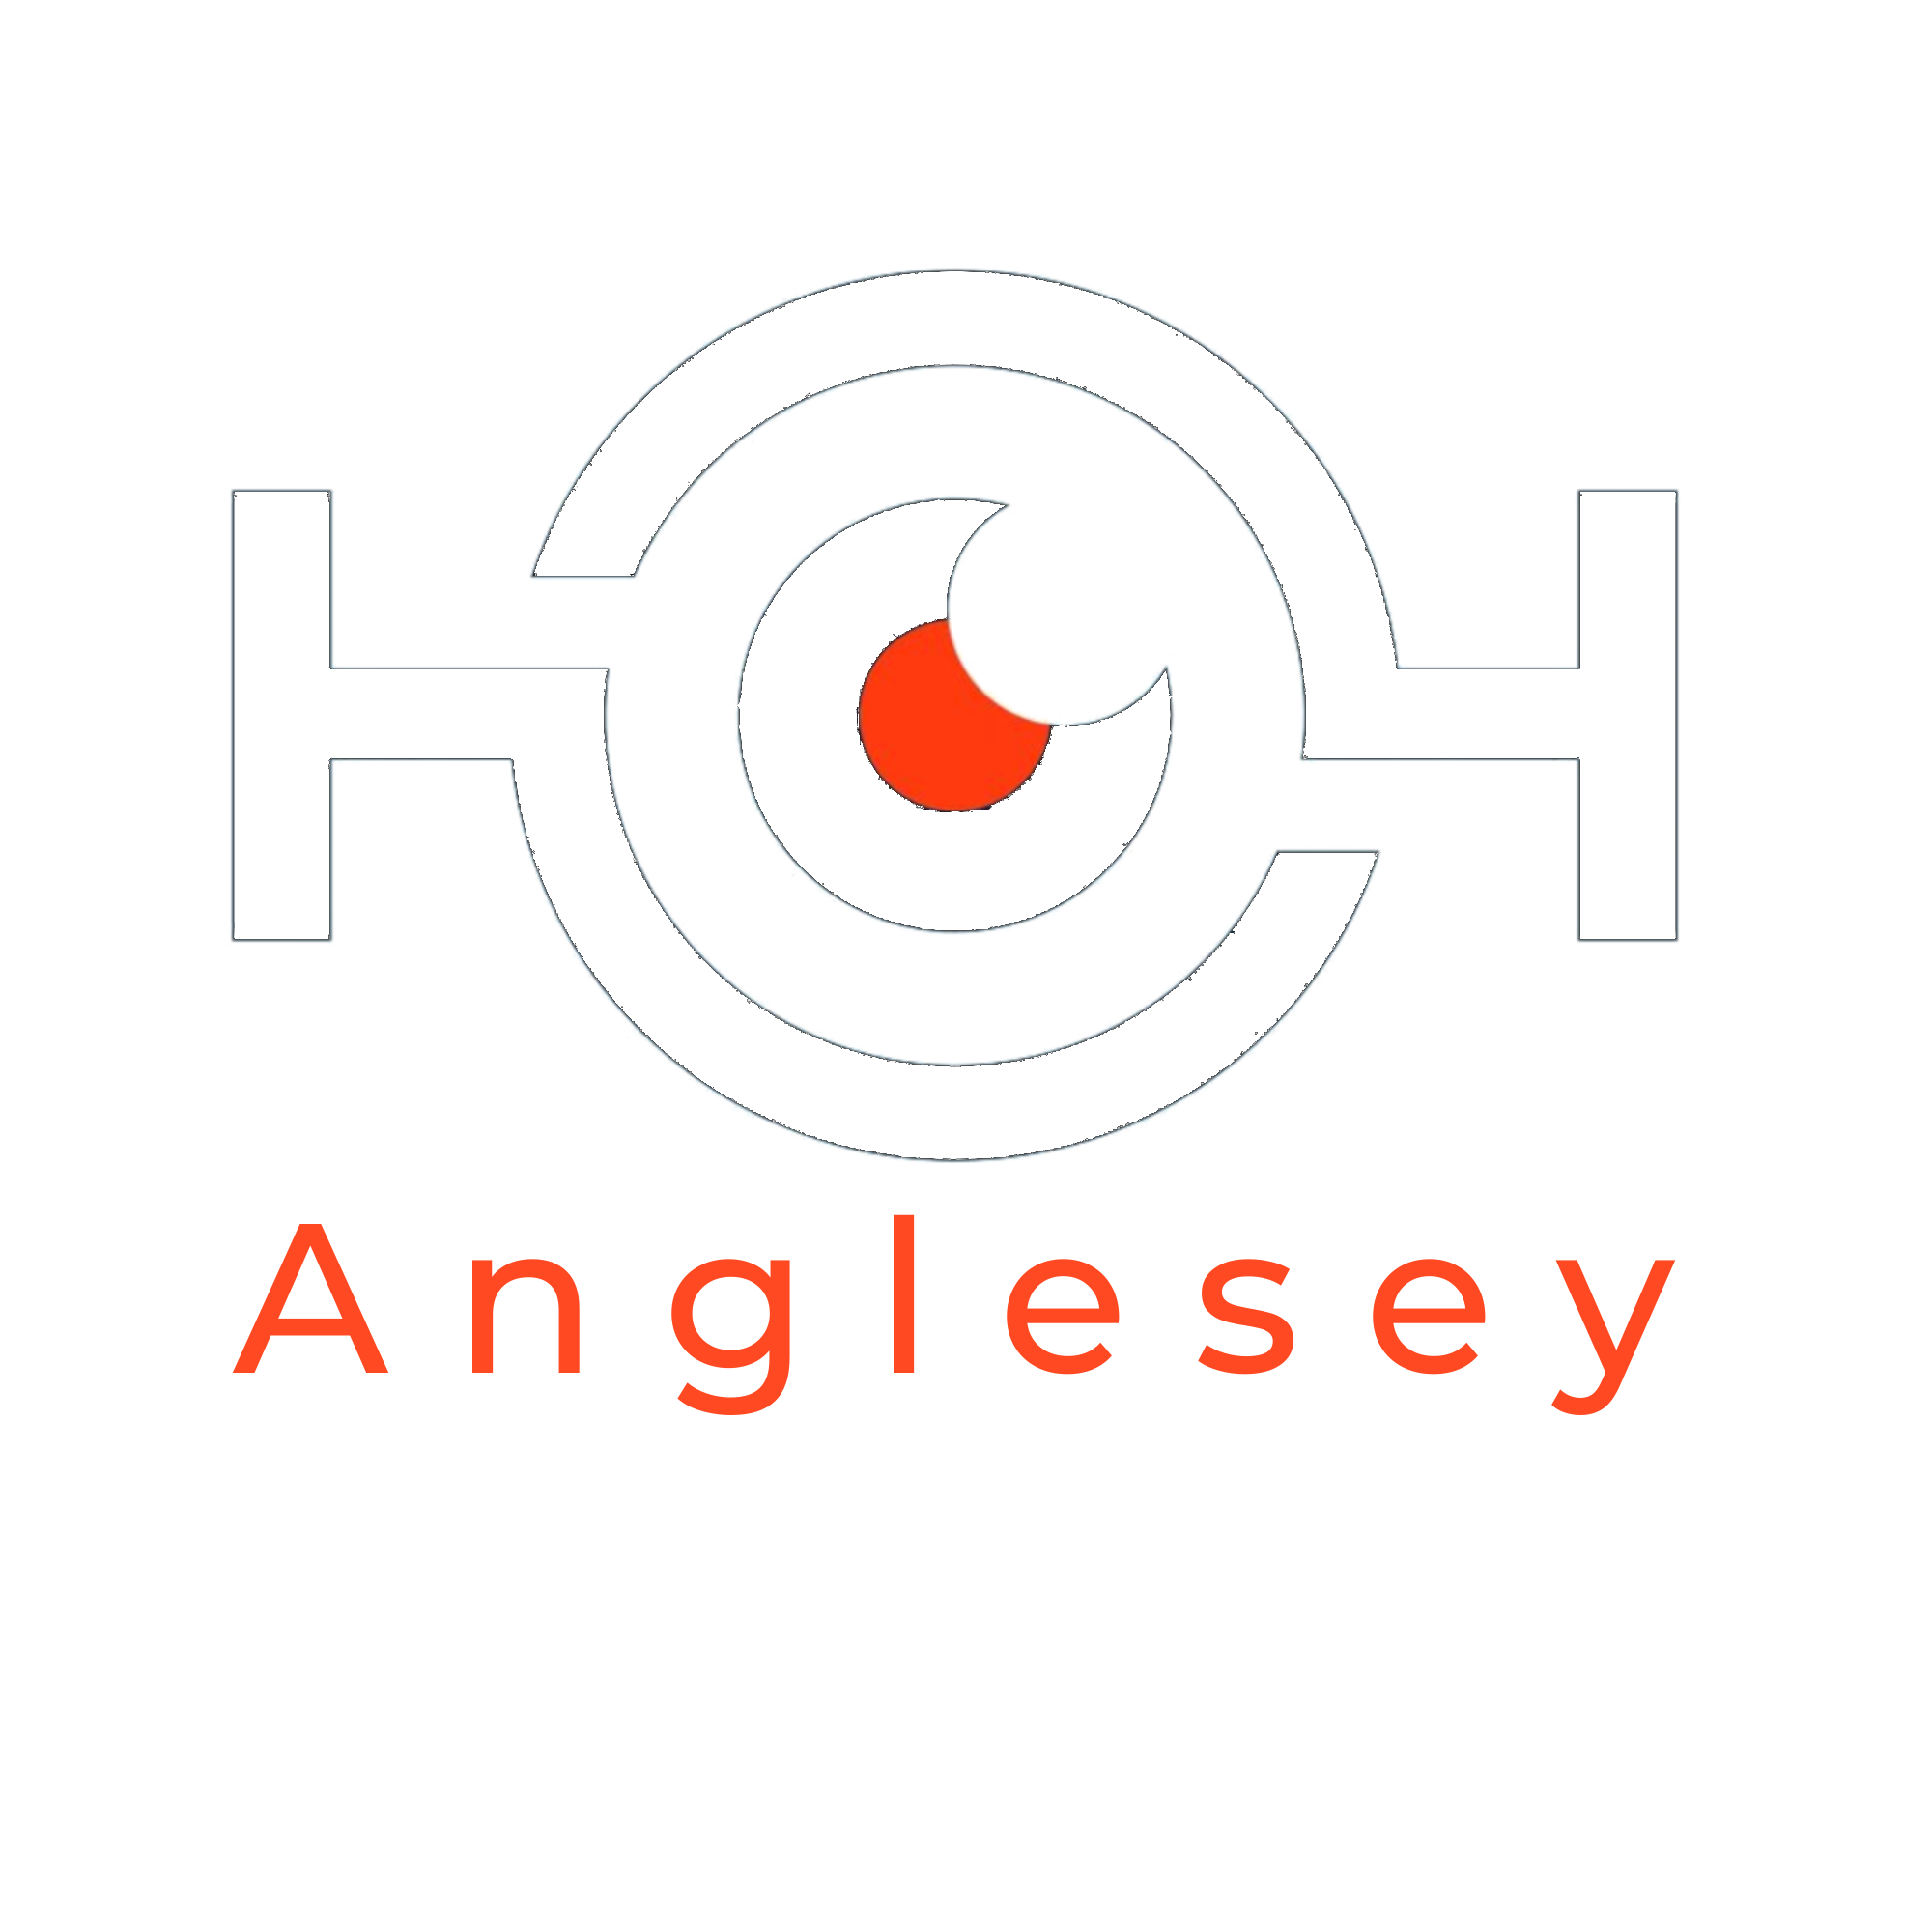 Anglesey Drone Media Services